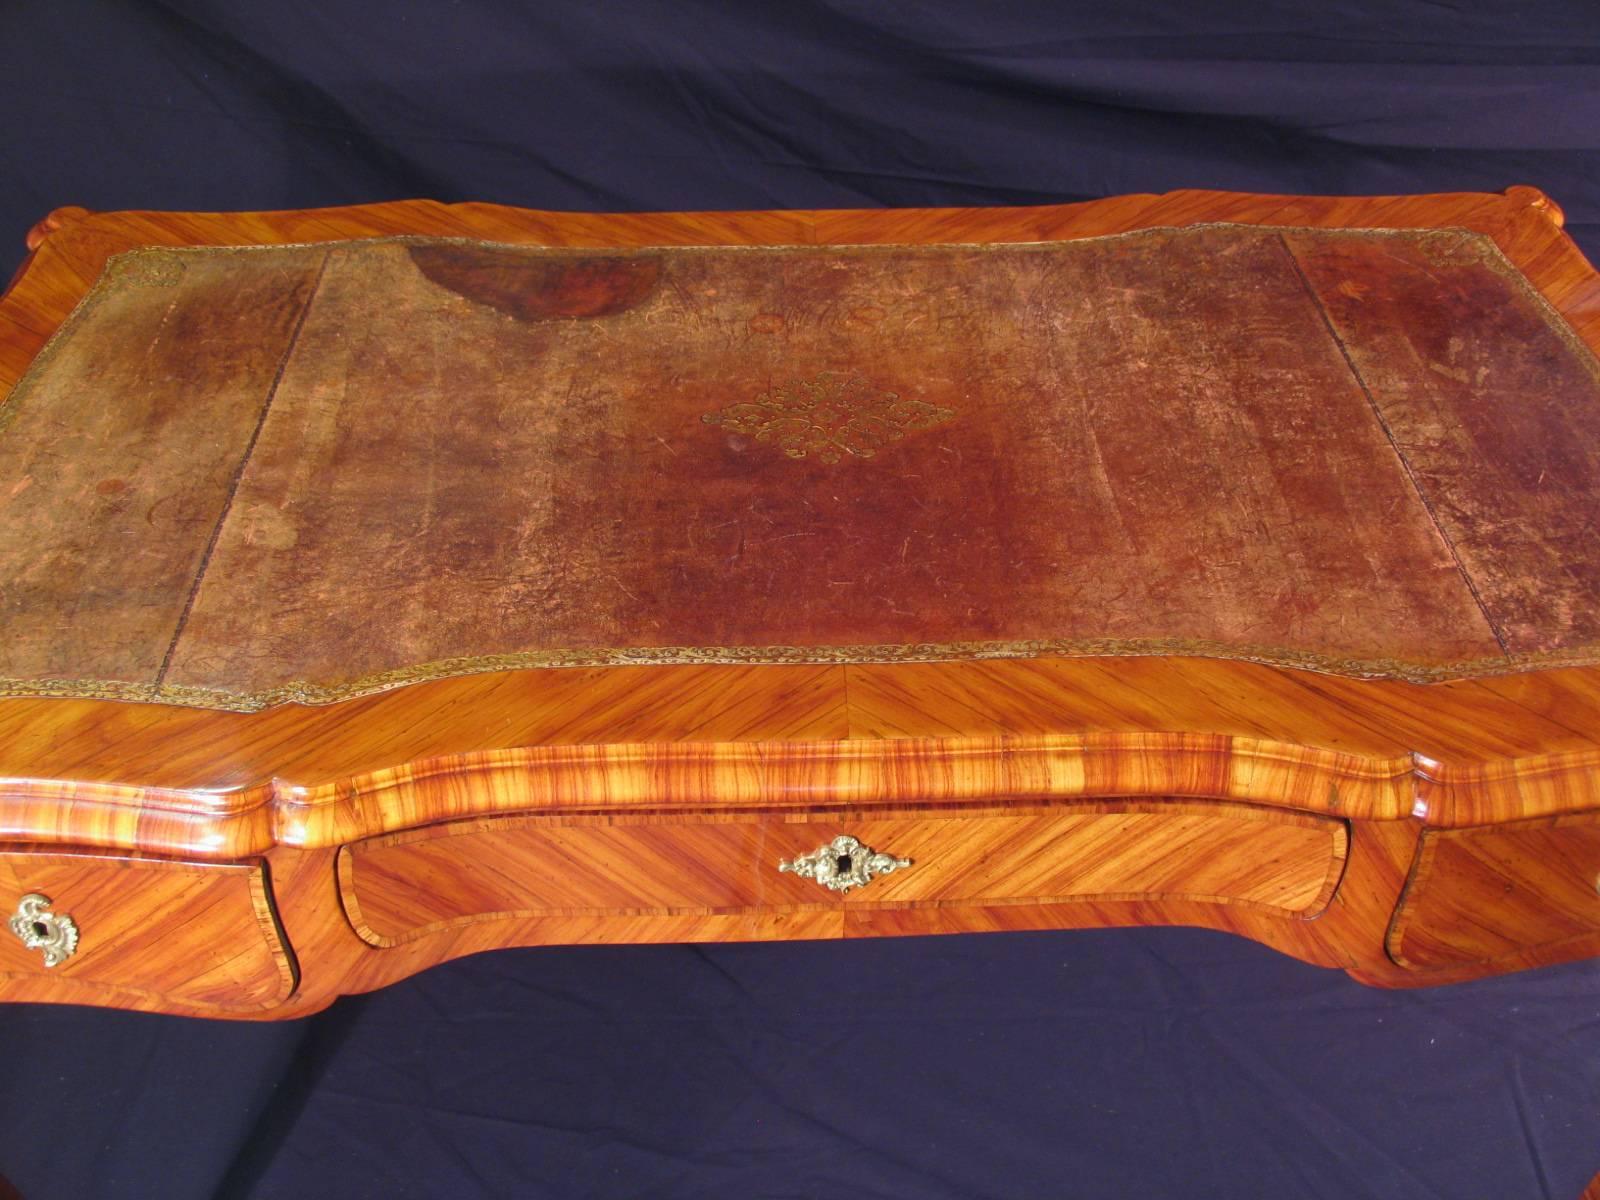 Louis XV bureau plat, France, 18th-19th century. Rosewood veneer. The writing surface is lined with a gilt-tooled leather surface. Refinished. The bureau plat will be shipped from Germany. shipping costs to Boston are included.